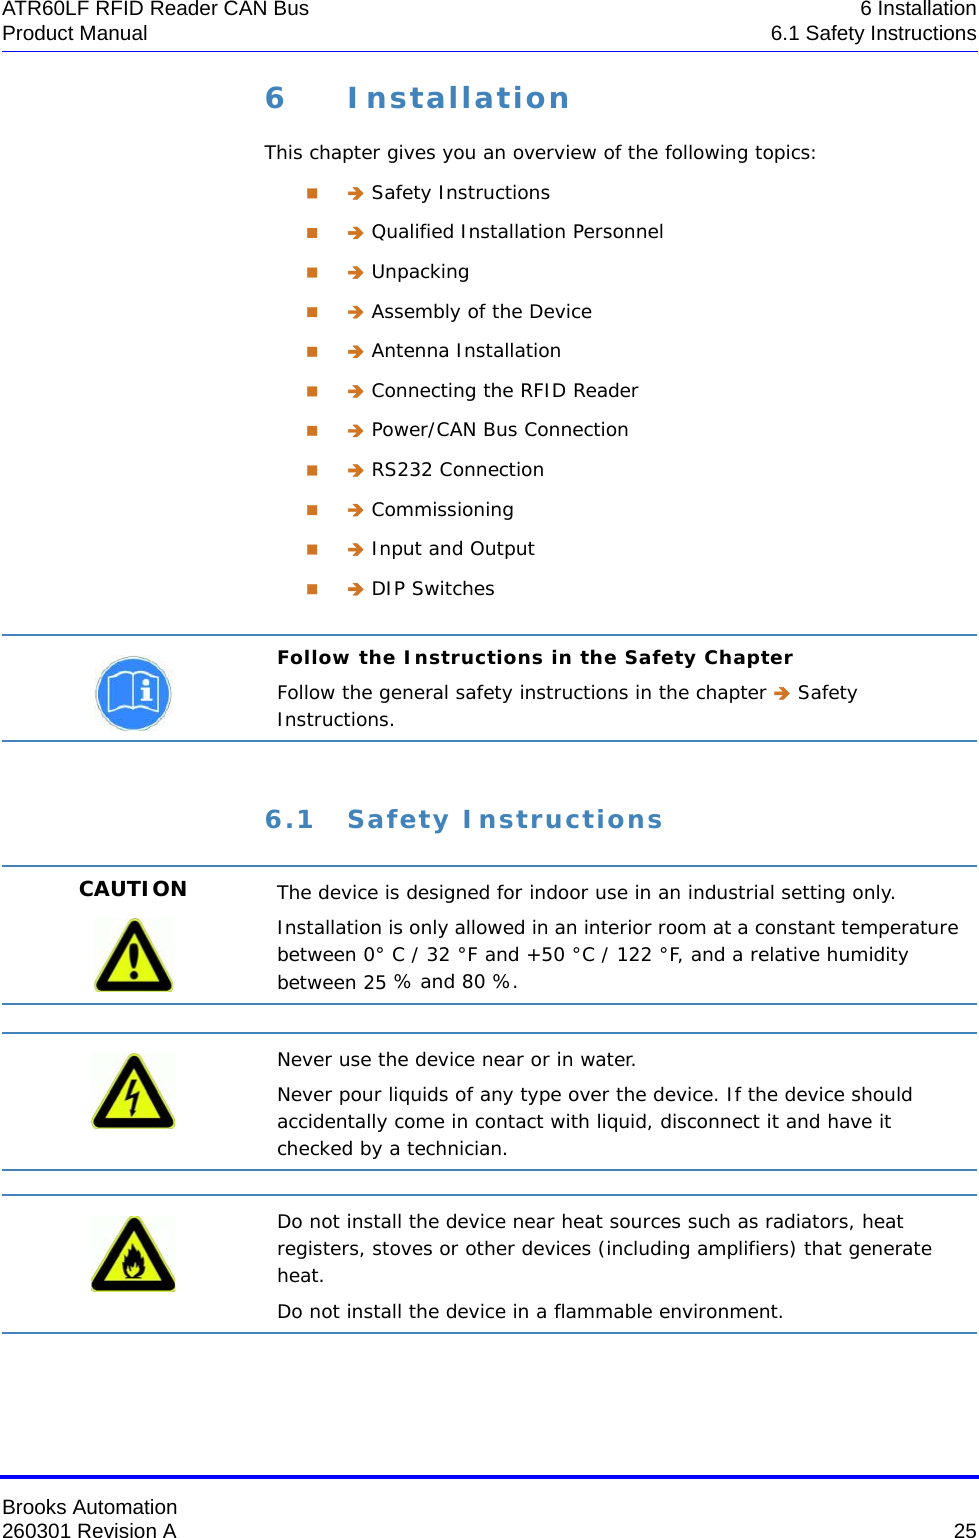 Brooks Automation260301 Revision A  25ATR60LF RFID Reader CAN Bus 6 InstallationProduct Manual 6.1 Safety Instructions6 InstallationThis chapter gives you an overview of the following topics:  Safety Instructions  Qualified Installation Personnel  Unpacking  Assembly of the Device  Antenna Installation  Connecting the RFID Reader  Power/CAN Bus Connection  RS232 Connection  Commissioning  Input and Output  DIP Switches6.1 Safety InstructionsFollow the Instructions in the Safety ChapterFollow the general safety instructions in the chapter  Safety Instructions.CAUTION The device is designed for indoor use in an industrial setting only.Installation is only allowed in an interior room at a constant temperature between 0° C / 32 °F and +50 °C / 122 °F, and a relative humidity between 25 % and 80 %.Never use the device near or in water.Never pour liquids of any type over the device. If the device should accidentally come in contact with liquid, disconnect it and have it checked by a technician.Do not install the device near heat sources such as radiators, heat registers, stoves or other devices (including amplifiers) that generate heat.Do not install the device in a flammable environment.